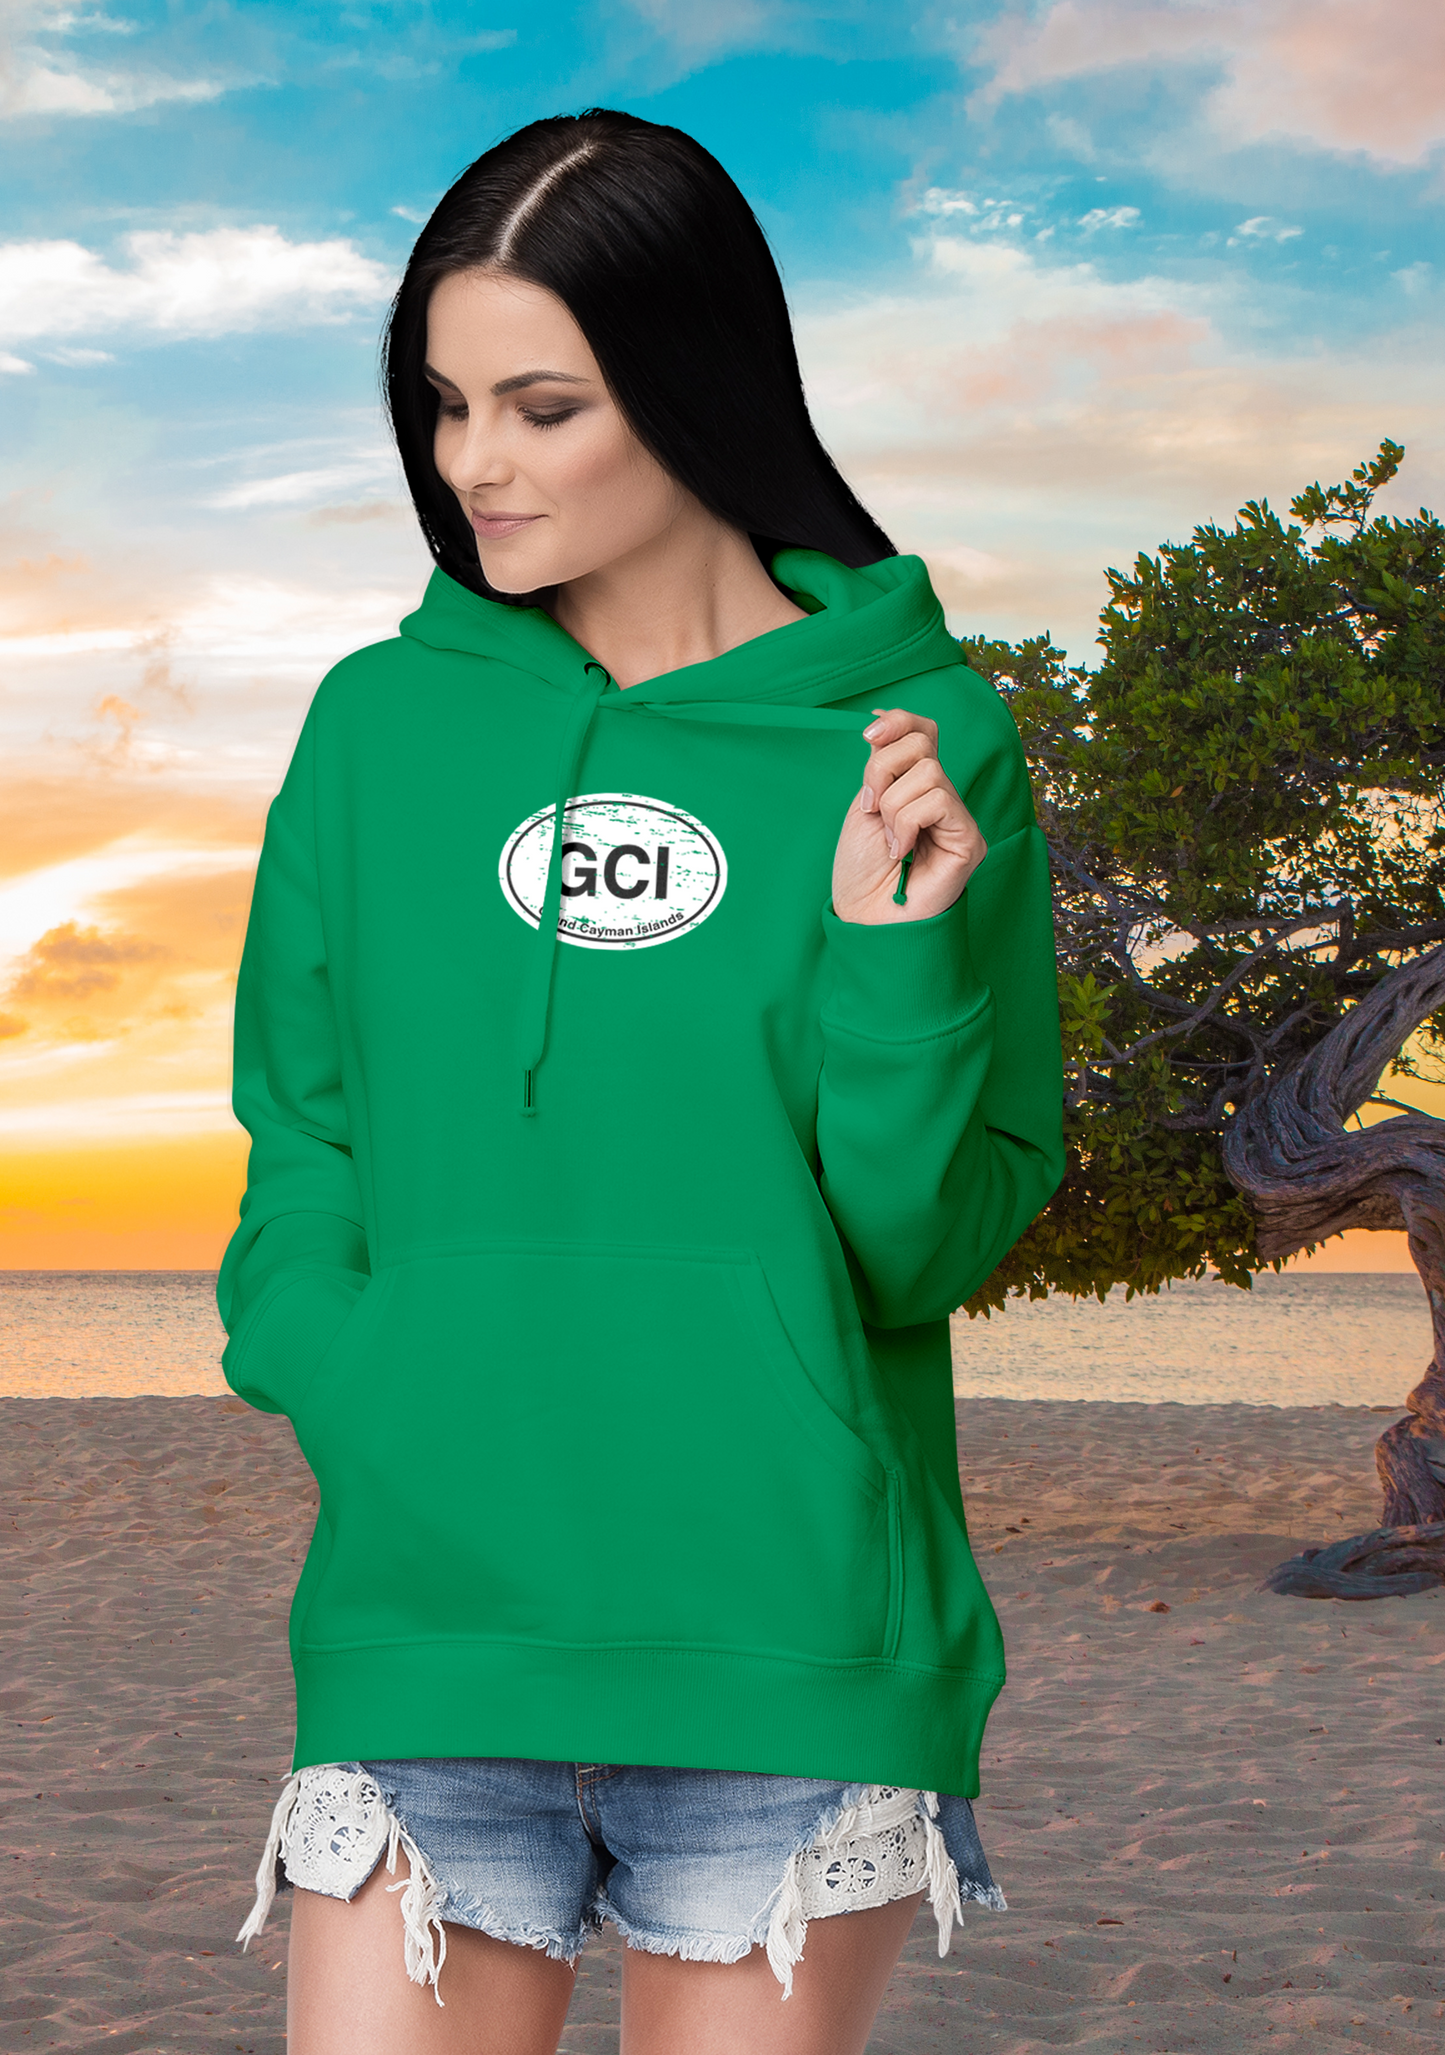 Grand Cayman Men's and Women's Classic Adult Hoodie - My Destination Location